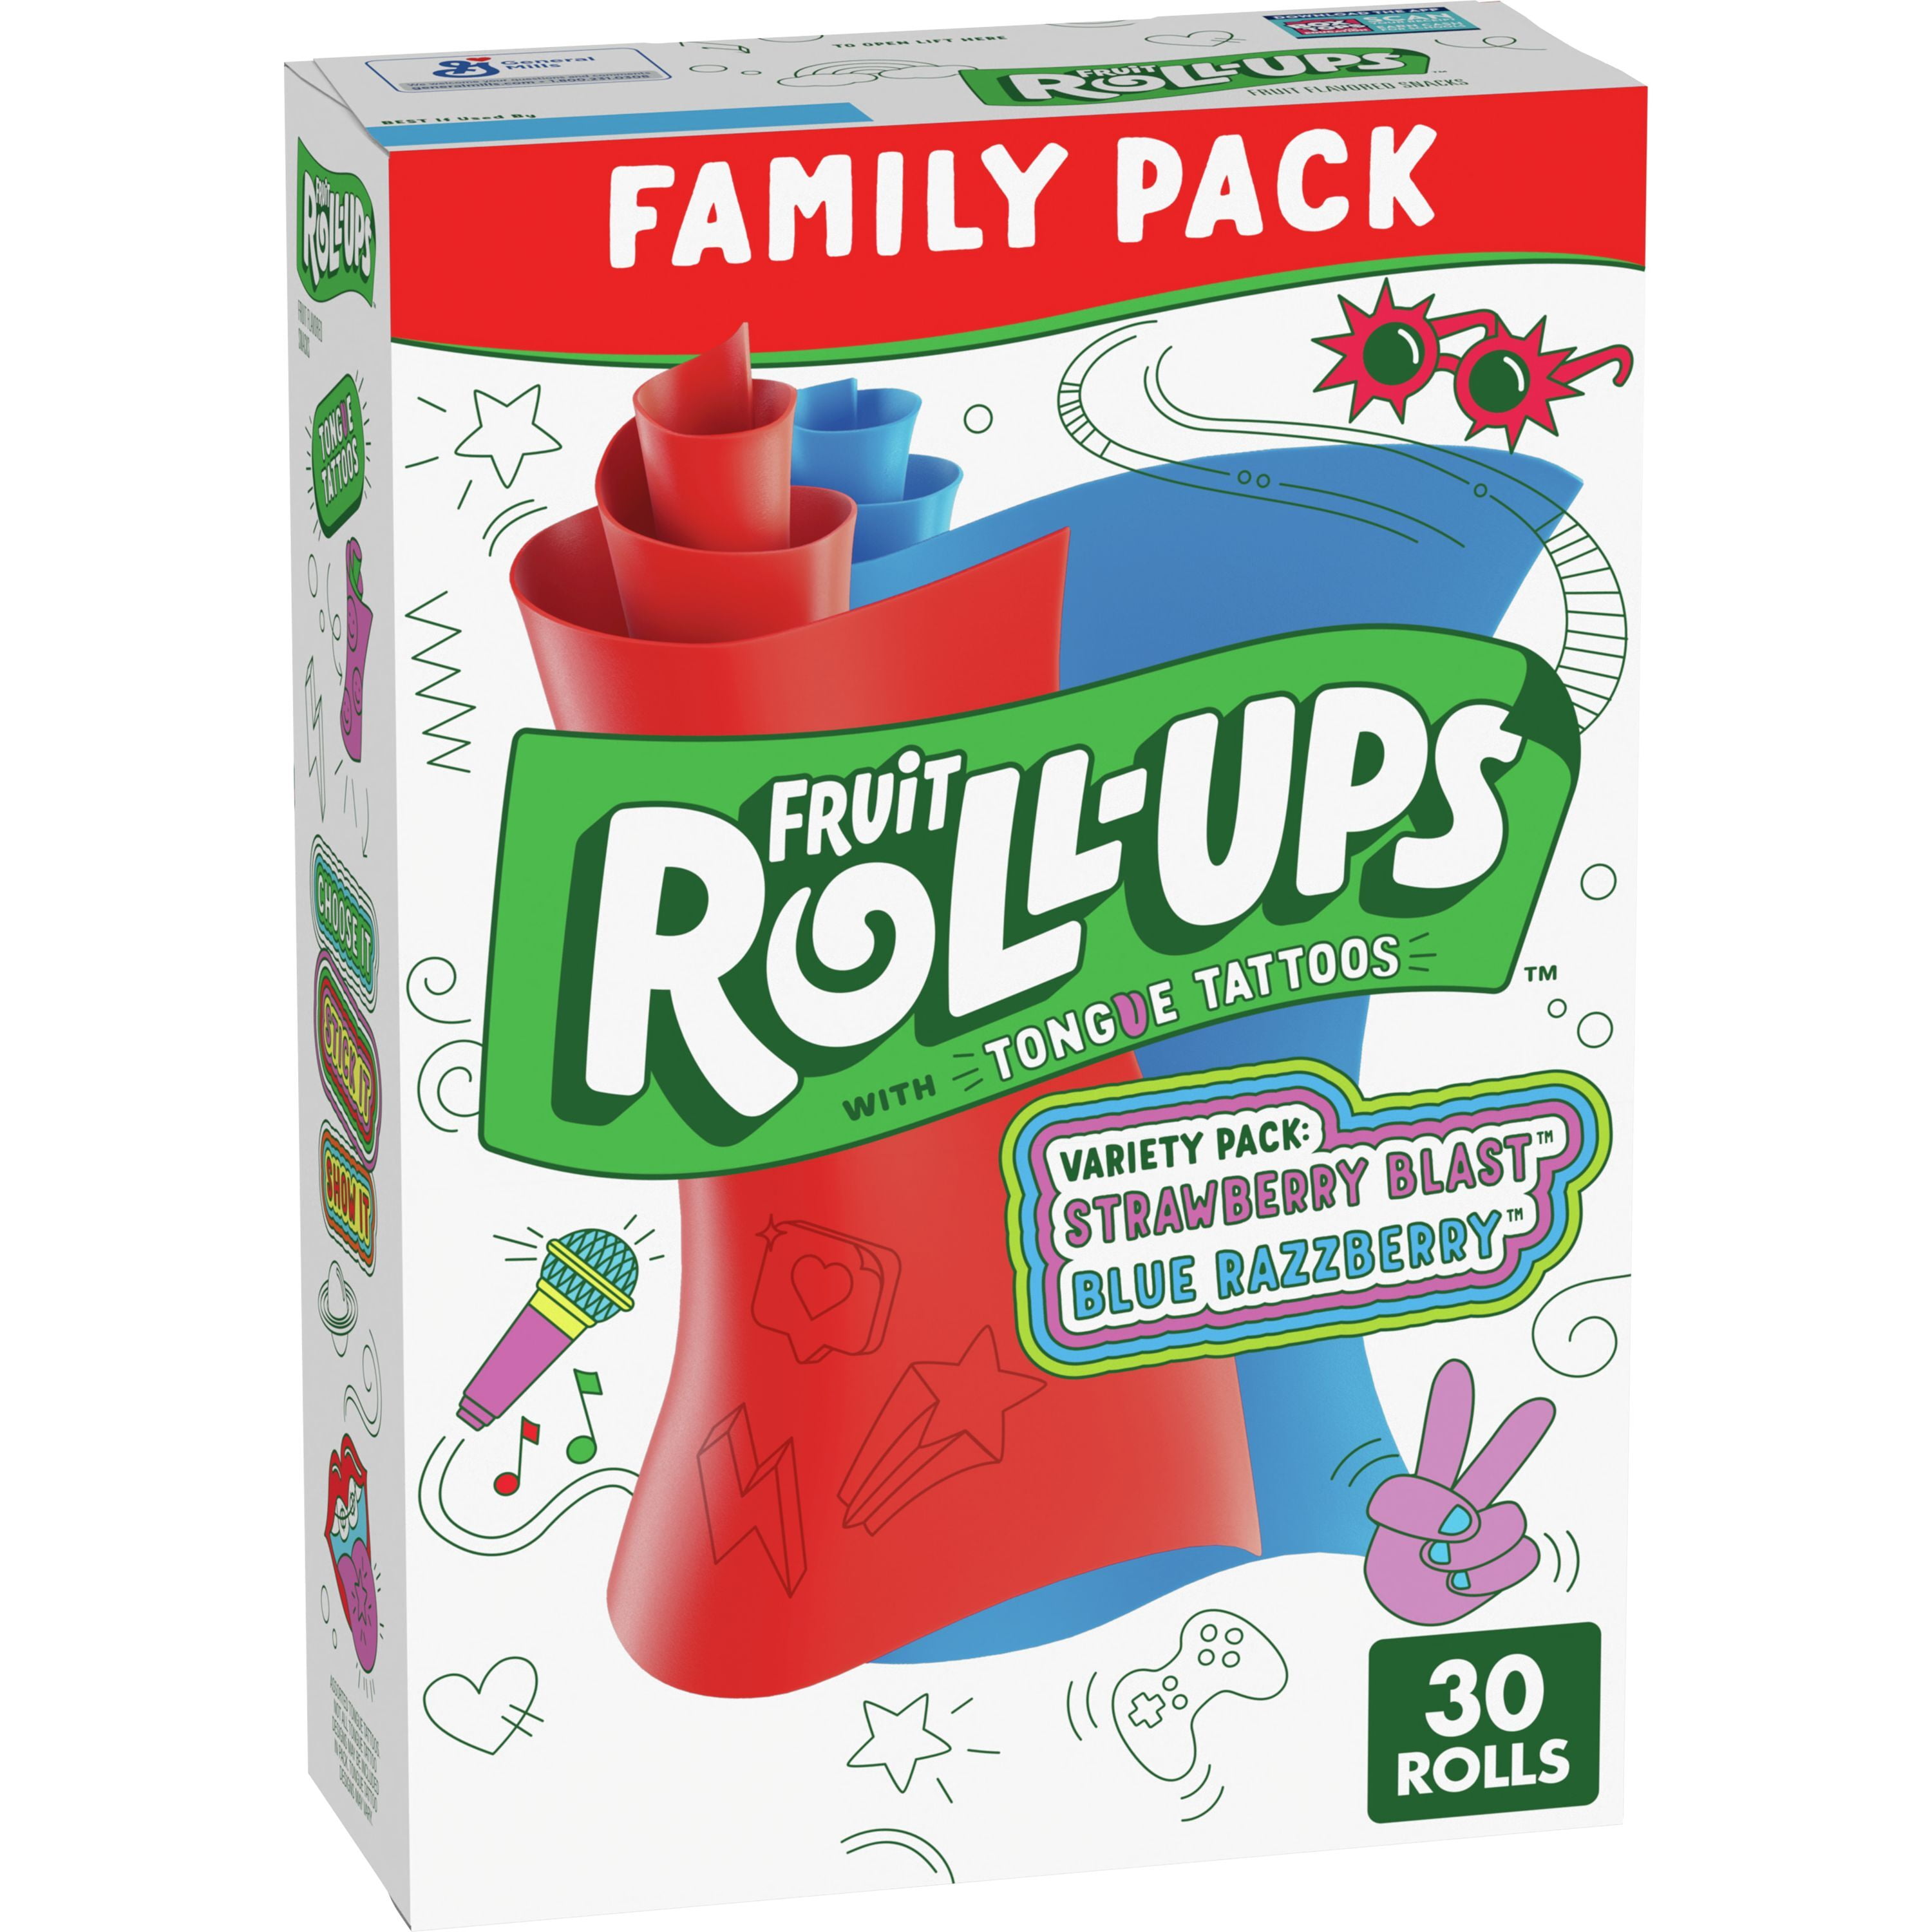 Fruit RollUps Has New Unicorn Tongue Tattoos to Channel Your 90s Soul